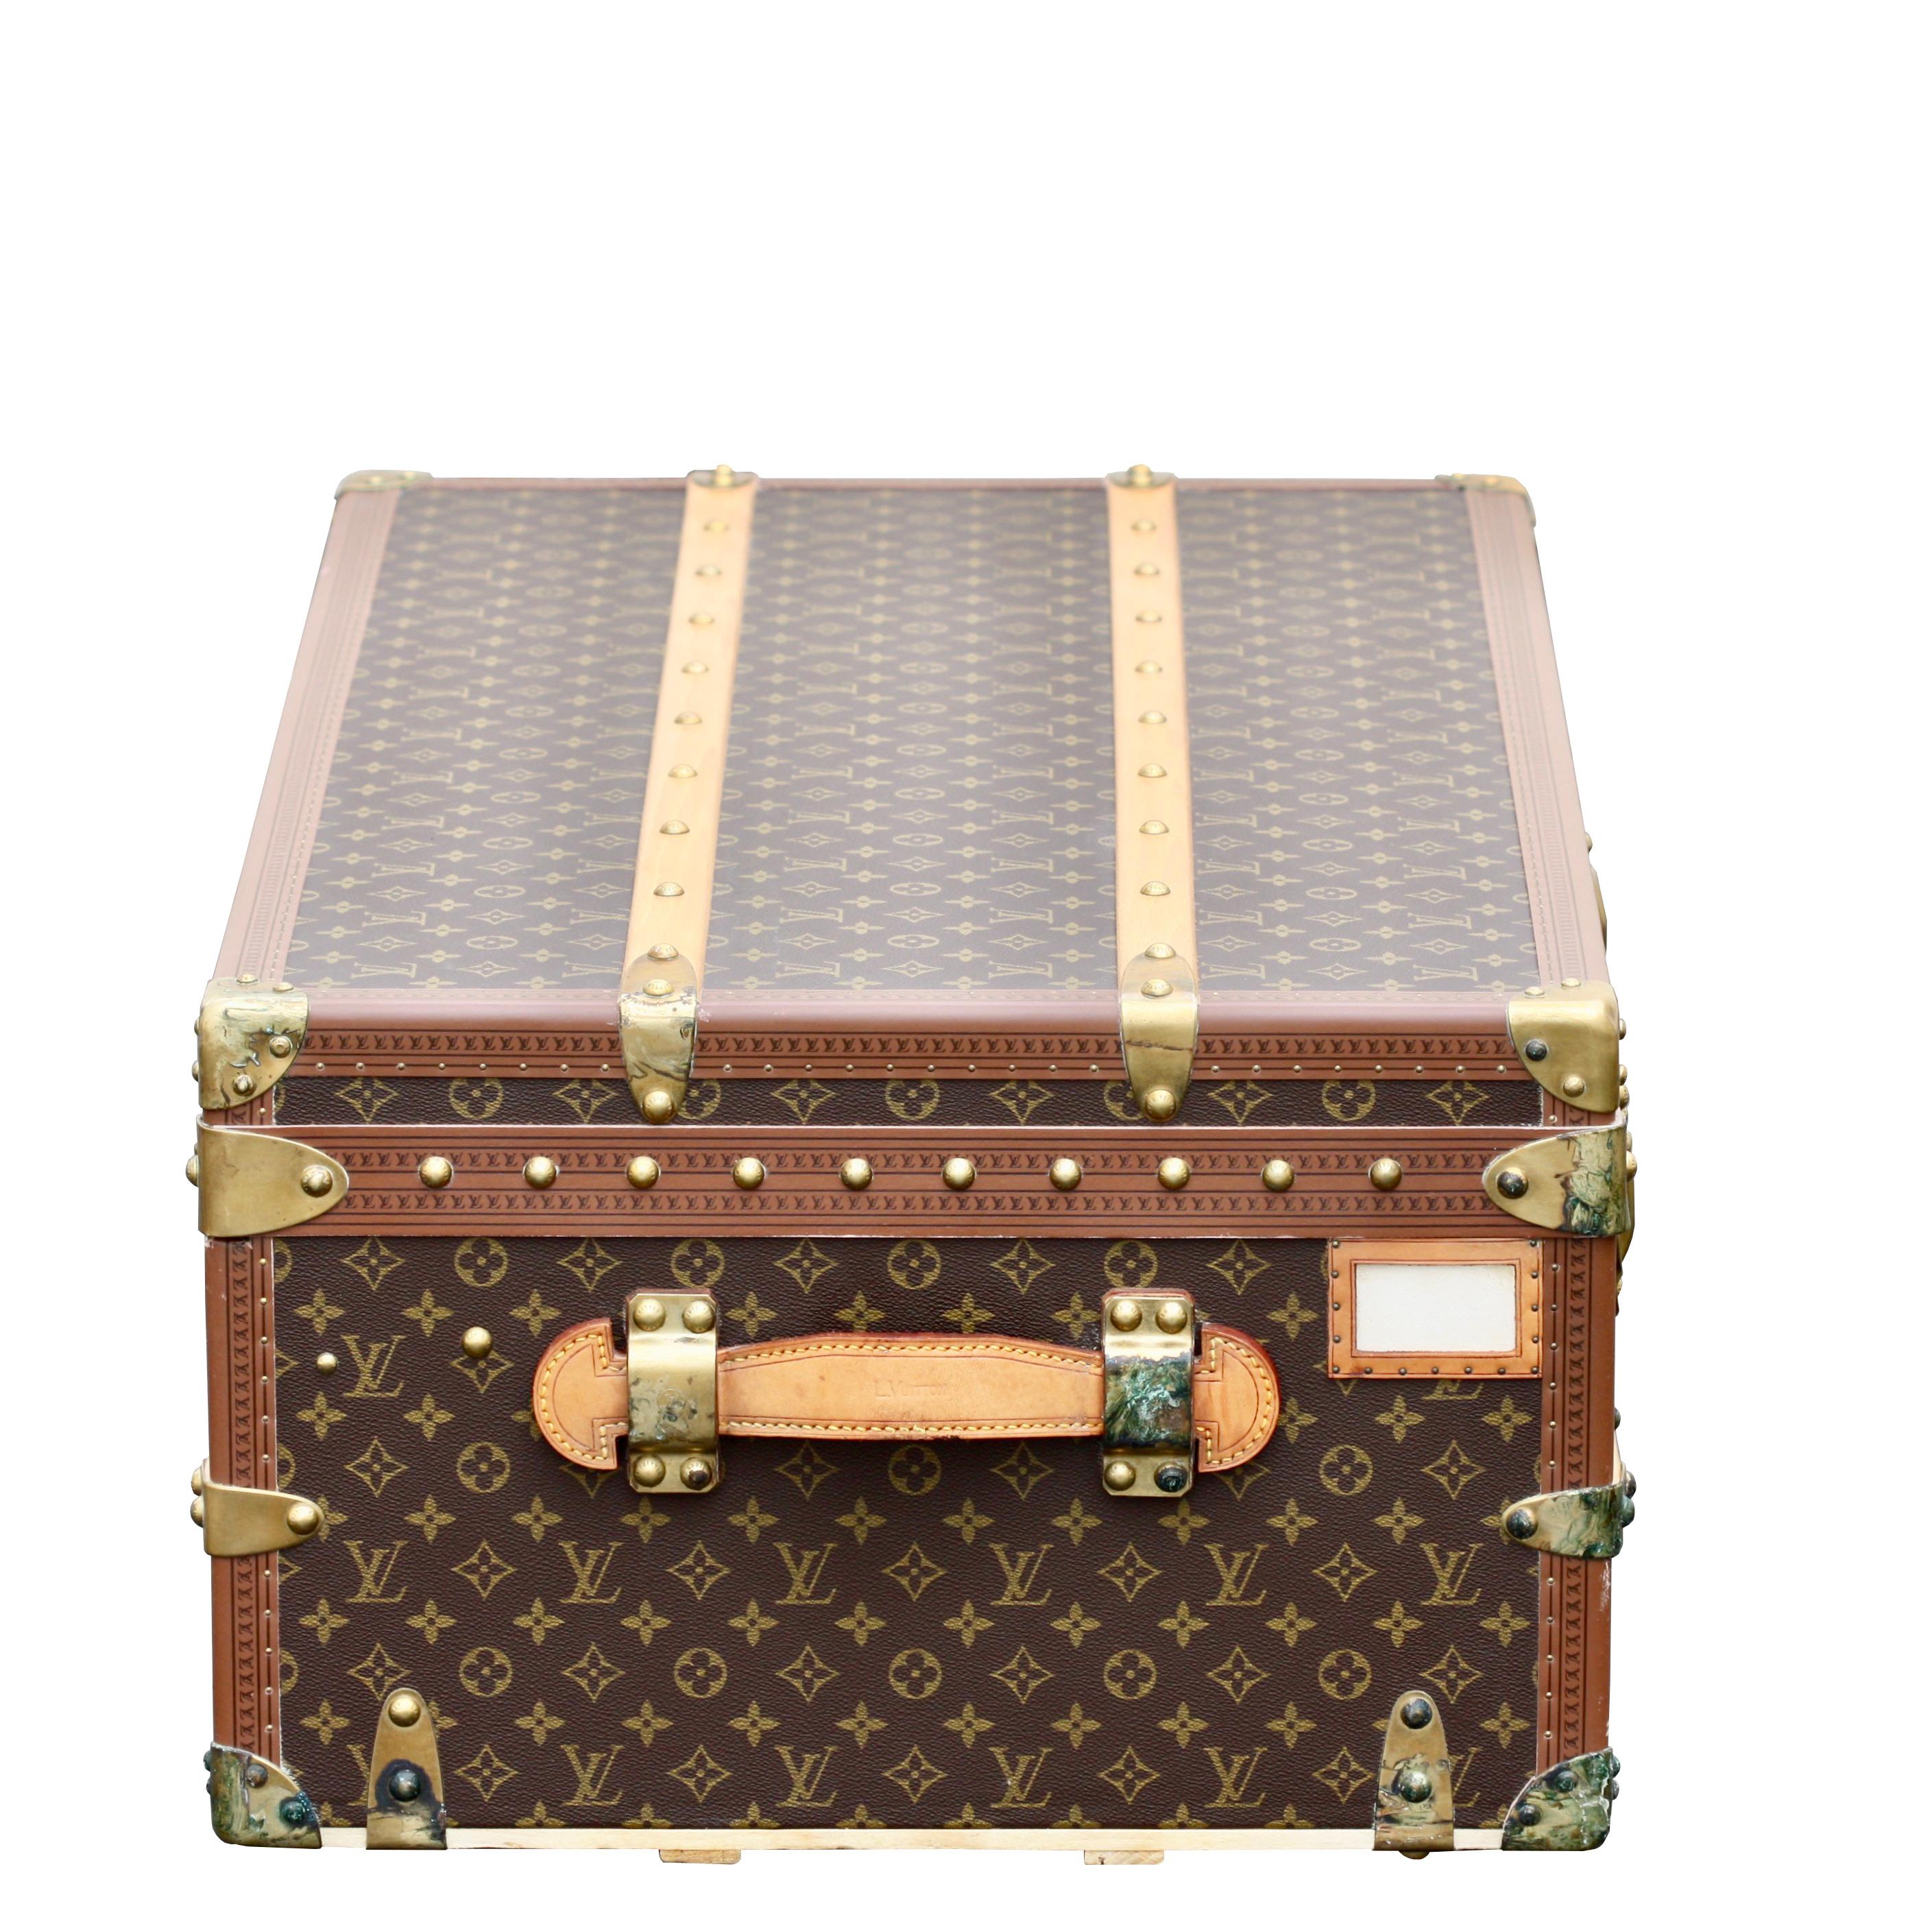 Louis Vuitton
Steamer Trunk with monogram pattern, leather edging, brass locks, catches, corners and rivets
the top opening to reveal a linen-lined organizing tray
printed canvas, beech, brass, leather, linen
escutcheon impressed with serial